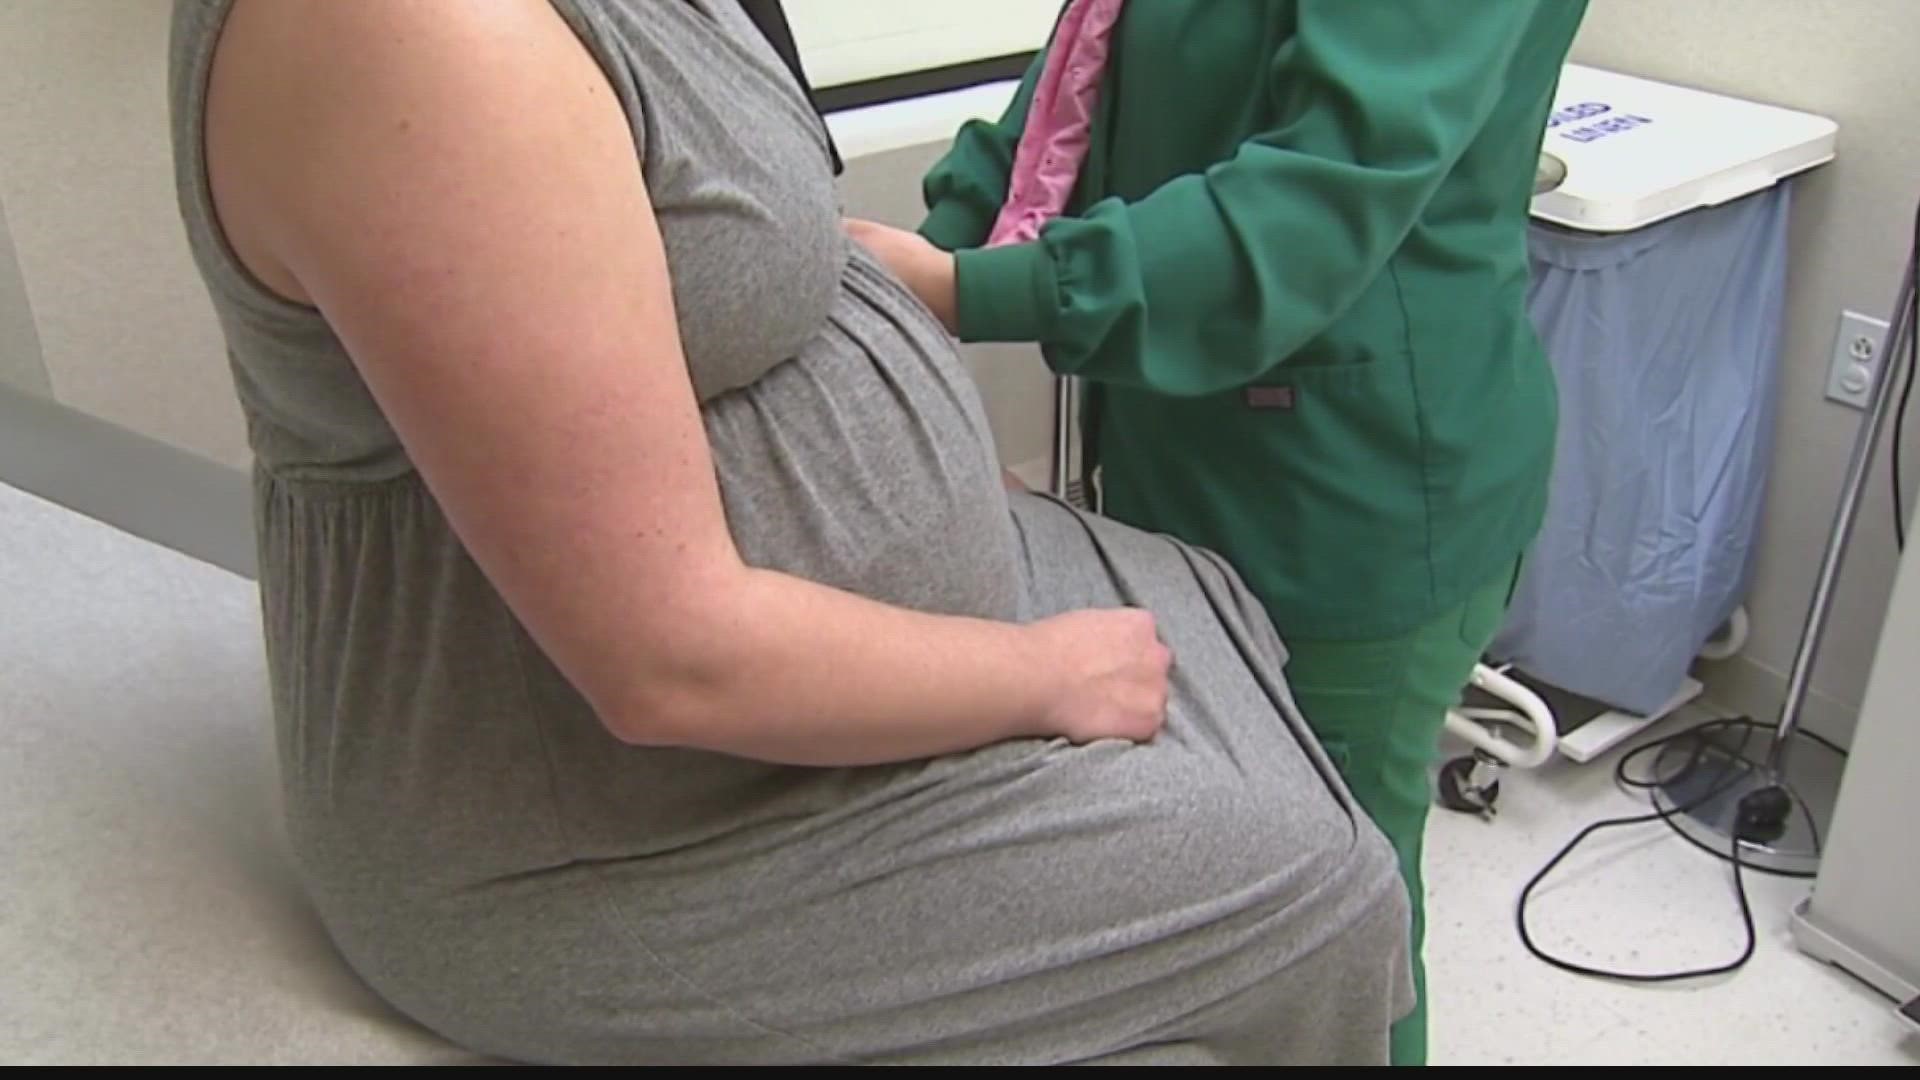 For months, medical professionals has urged anyone who is pregnant to get vaccinated against COVID. Their advice hasn't changed.